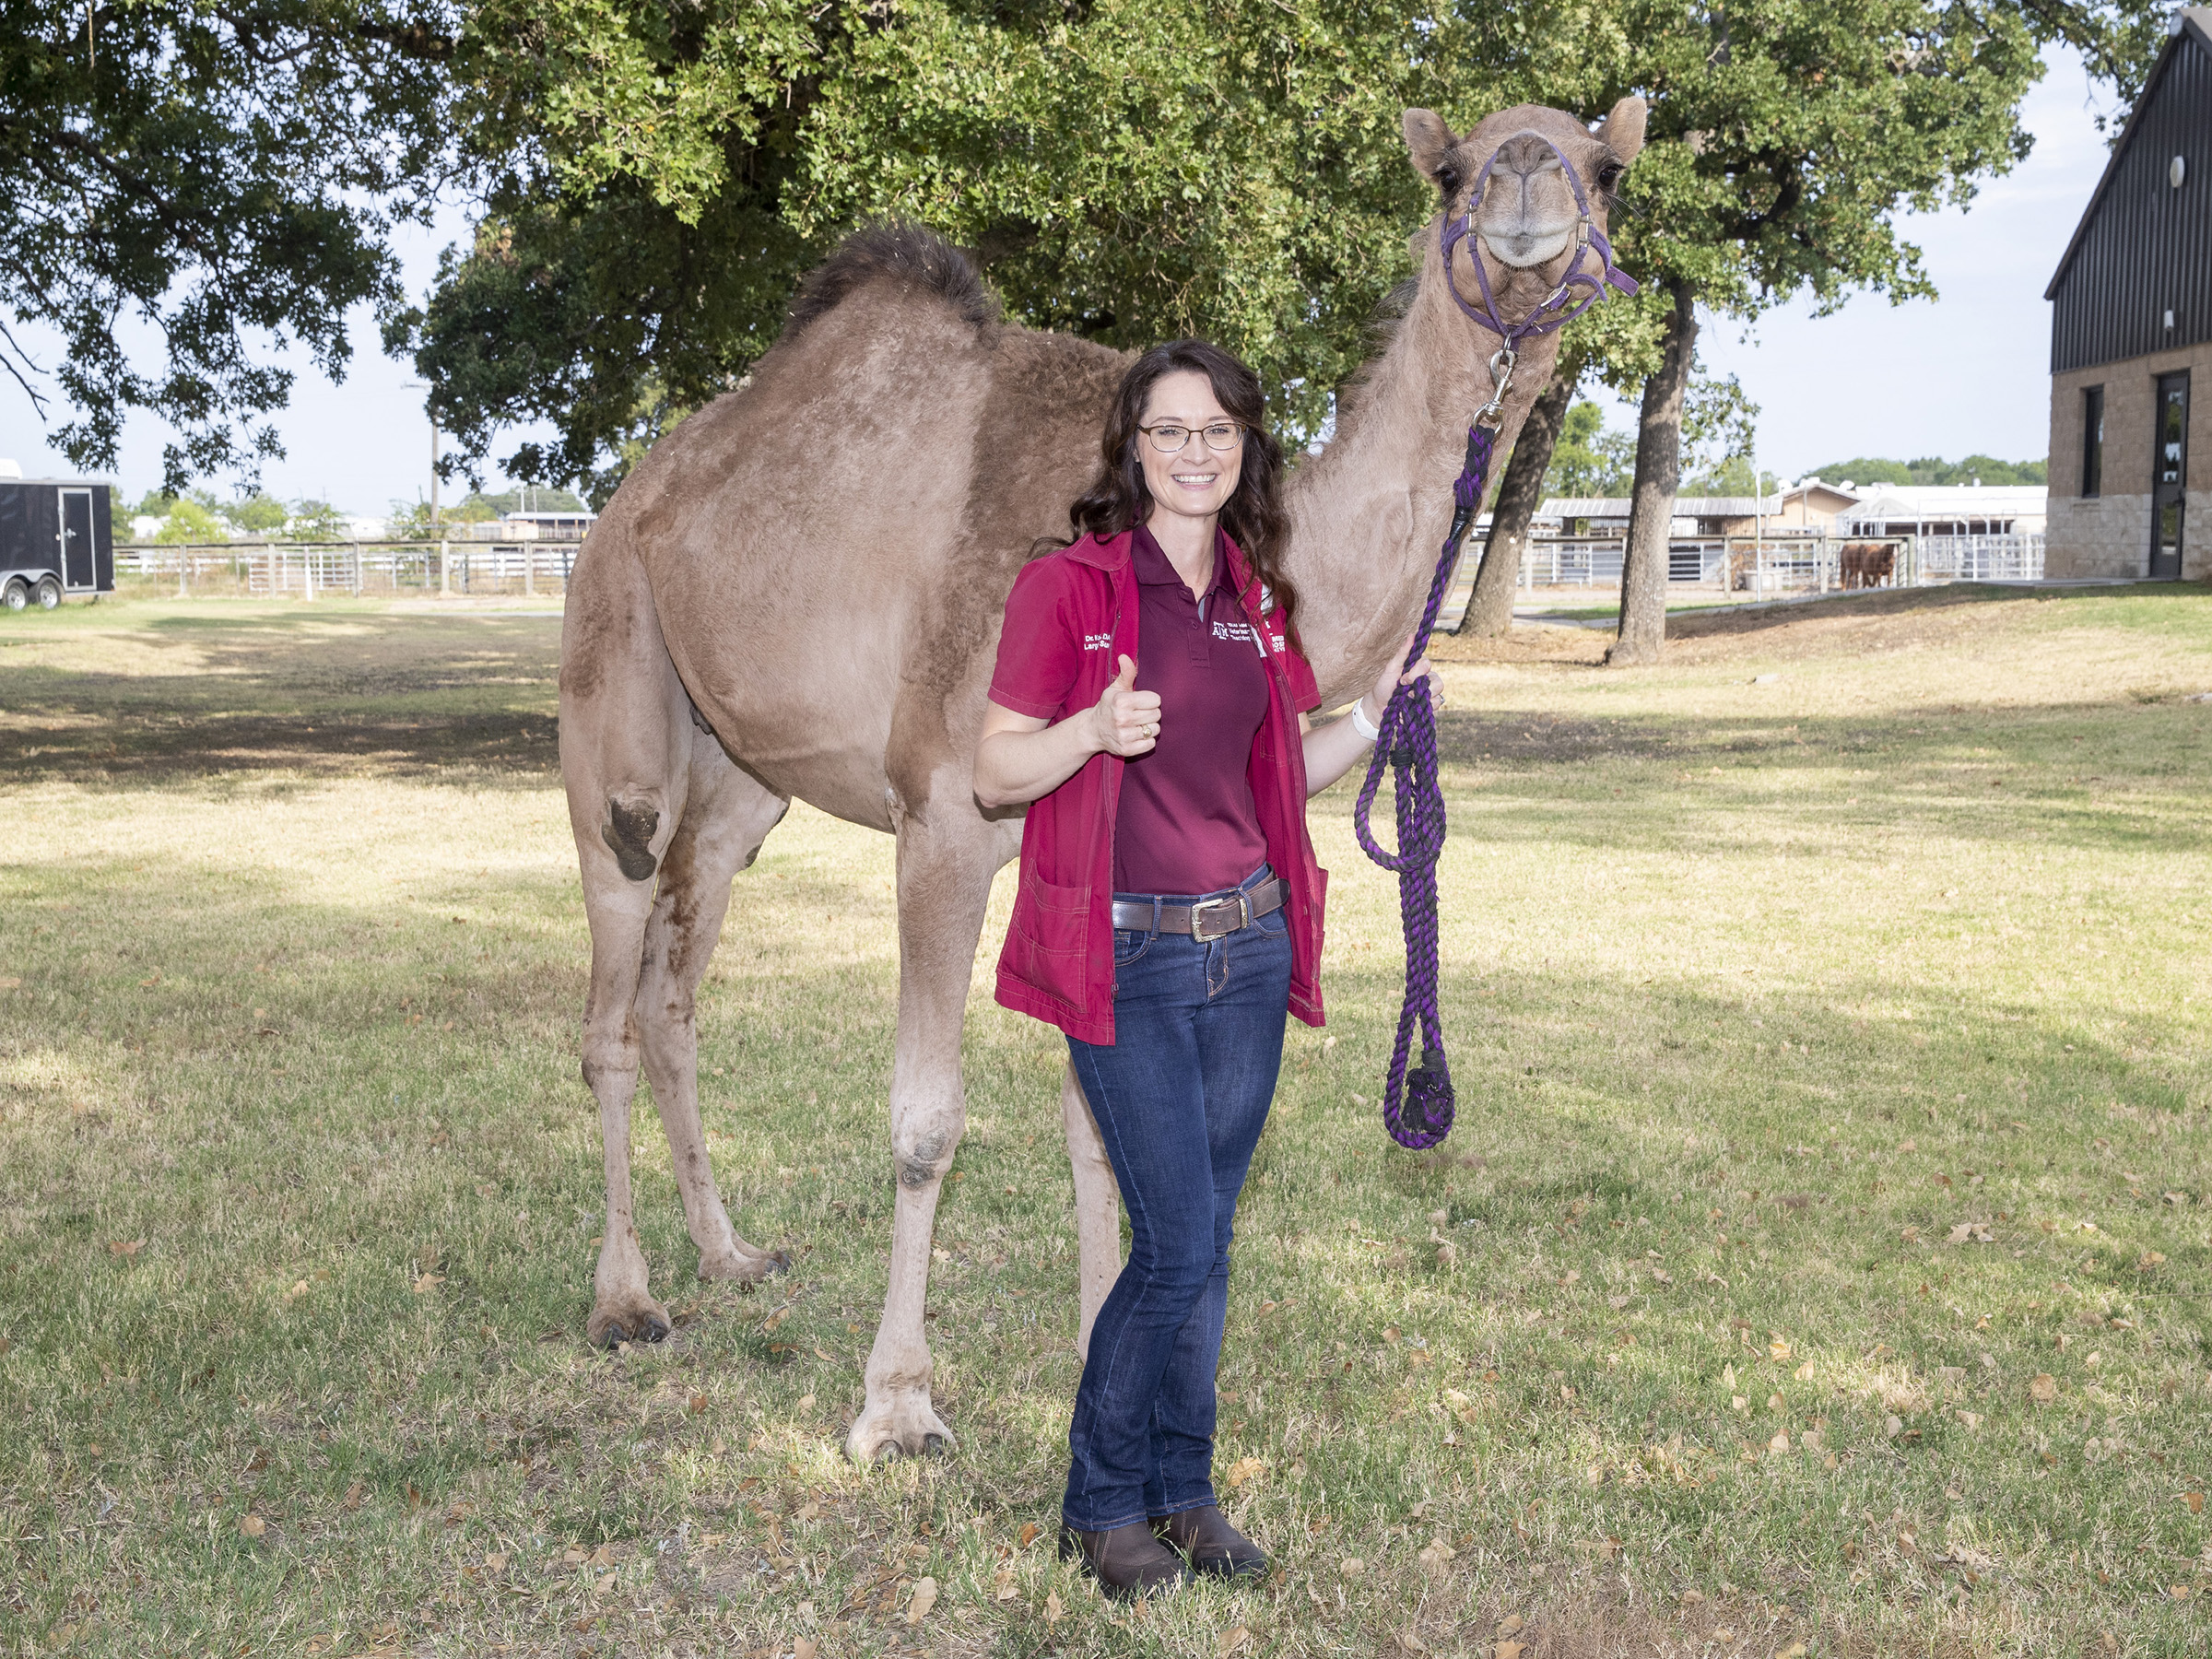 Dr. Kati Glass, in a maroon top and blue jeans, gives a thumbs up and holds the halter to Sybil the camel in a grassy field, while Sybil looks into the camera